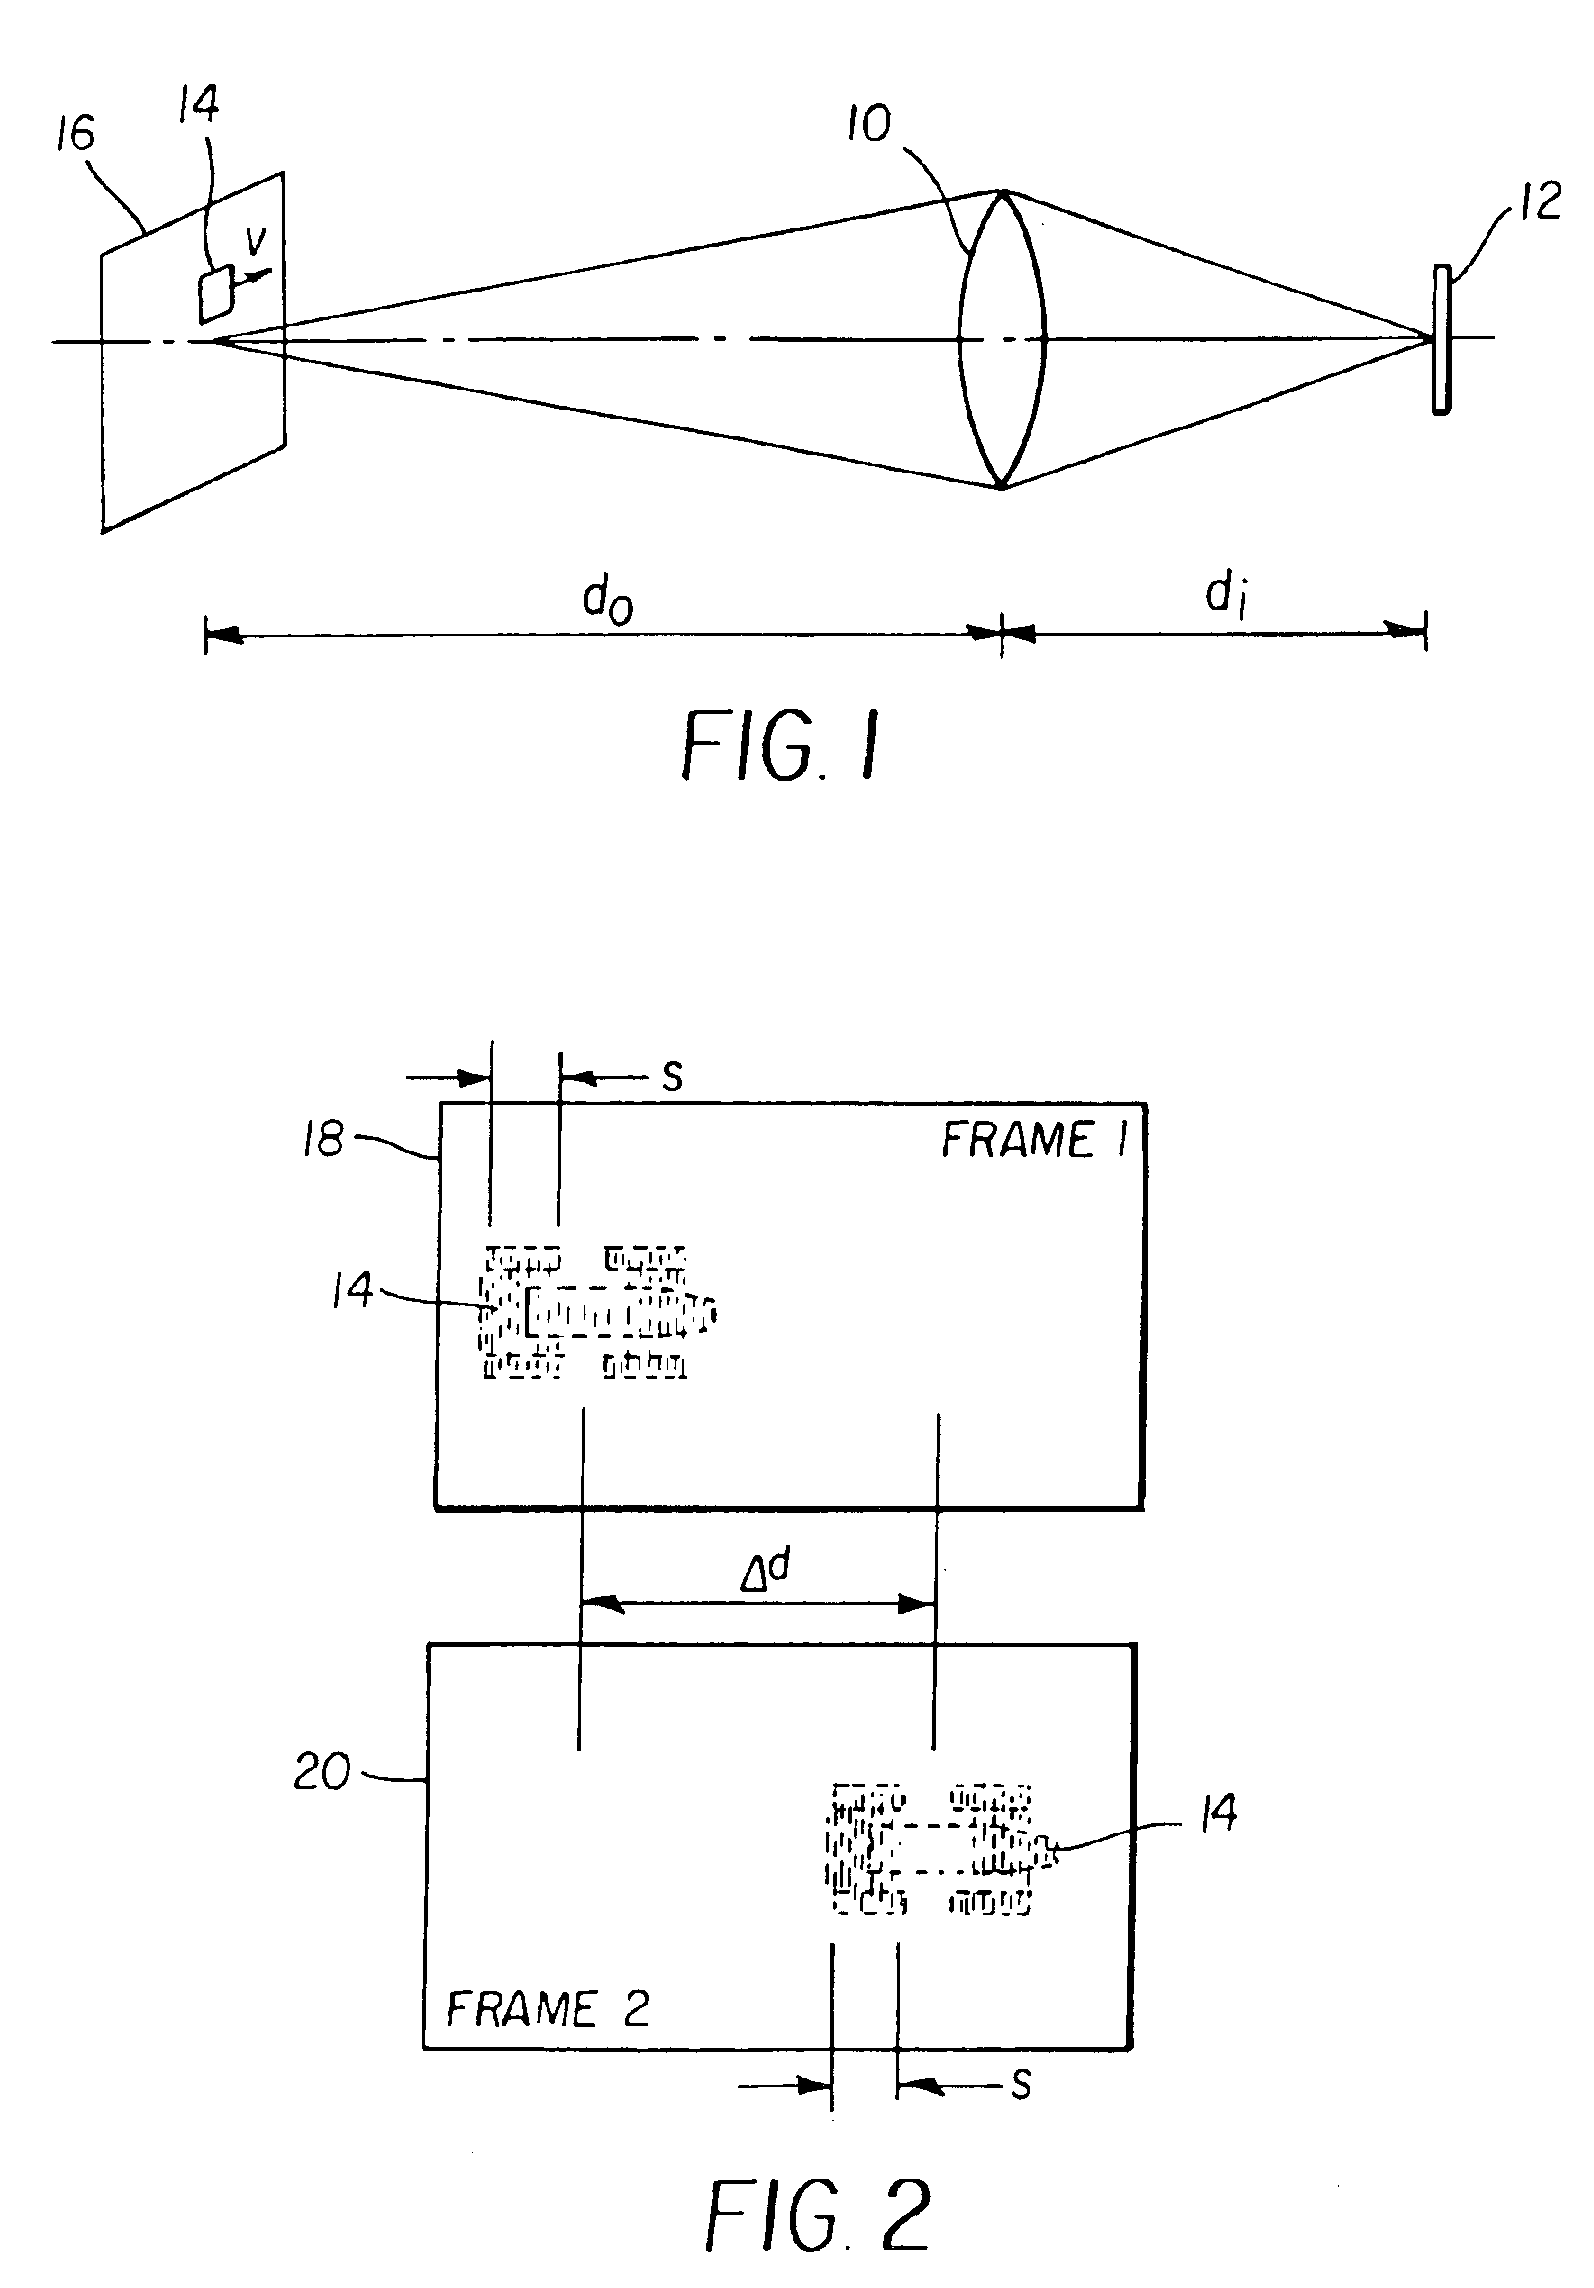 Method and adaptively deriving exposure time and frame rate from image motion